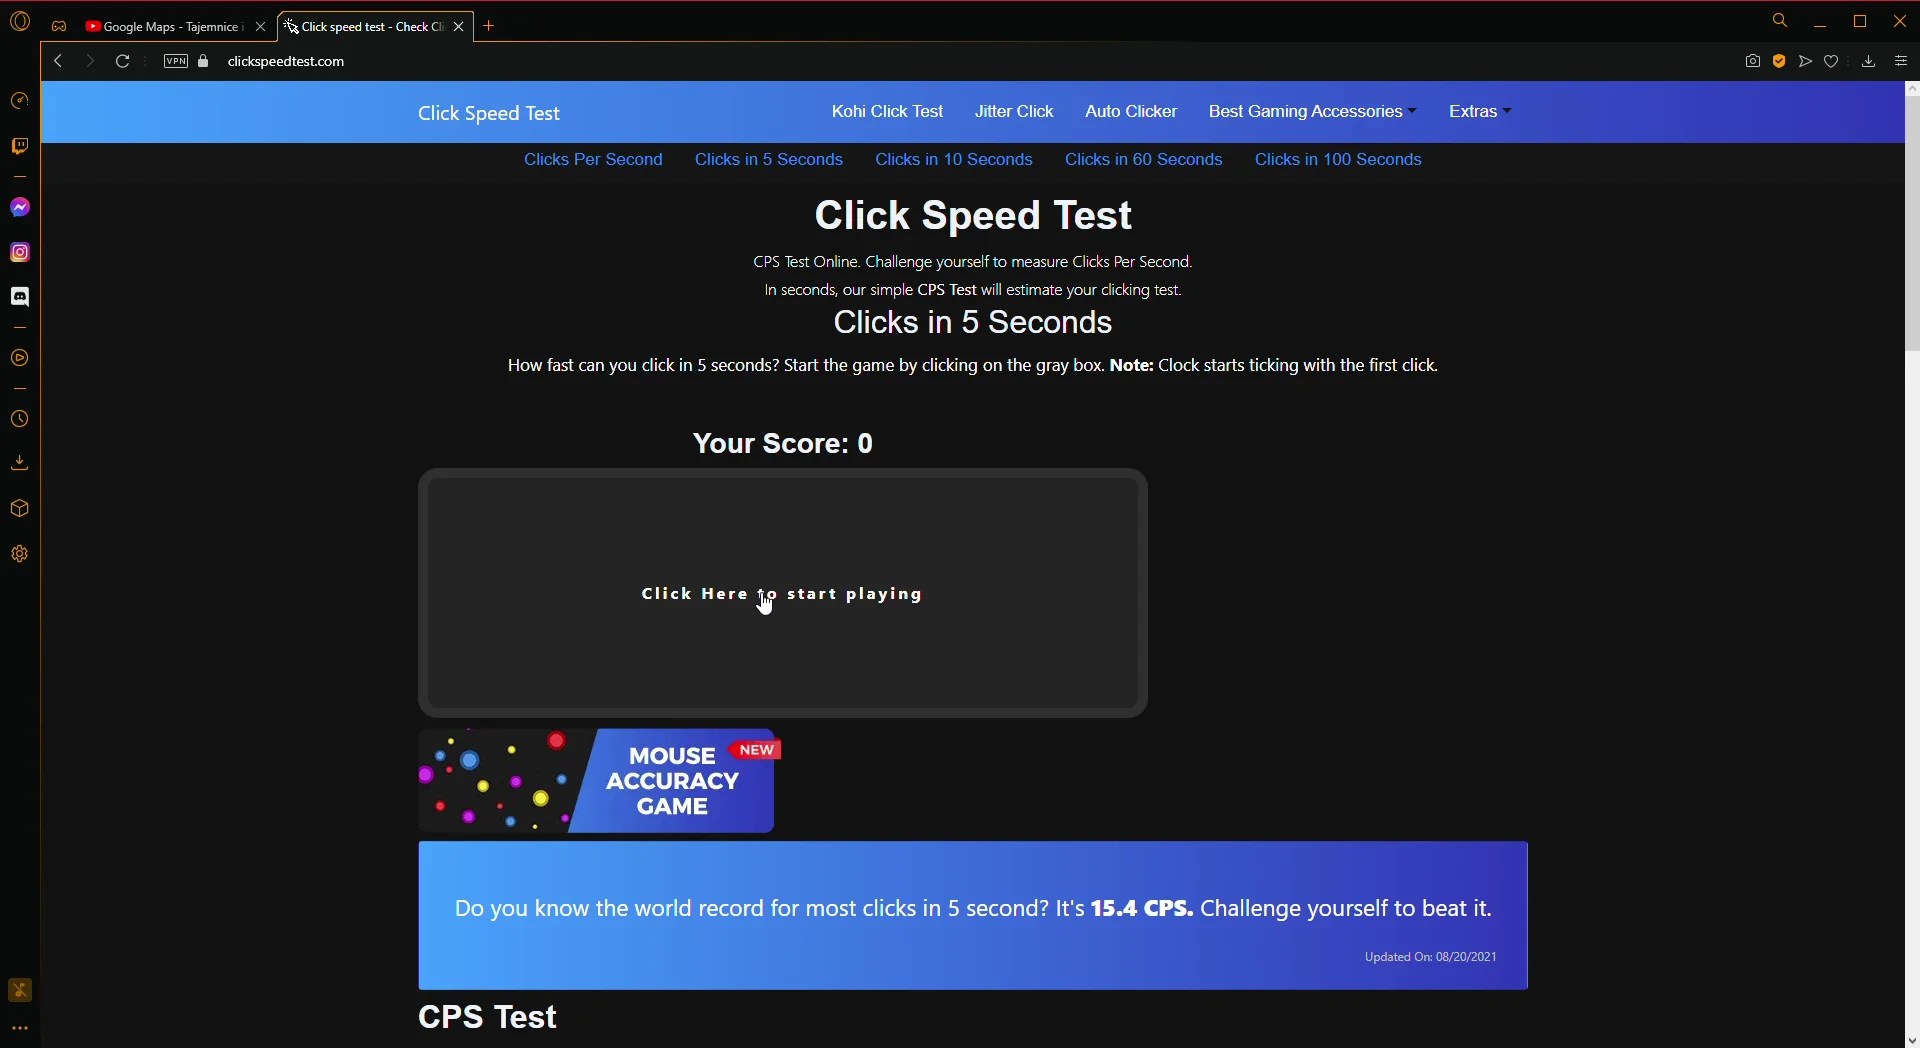 Click speed test - Check Clicks per Second - CPS Test Online – Opera  2021-08-20 18-31-11.mp4 on Vimeo